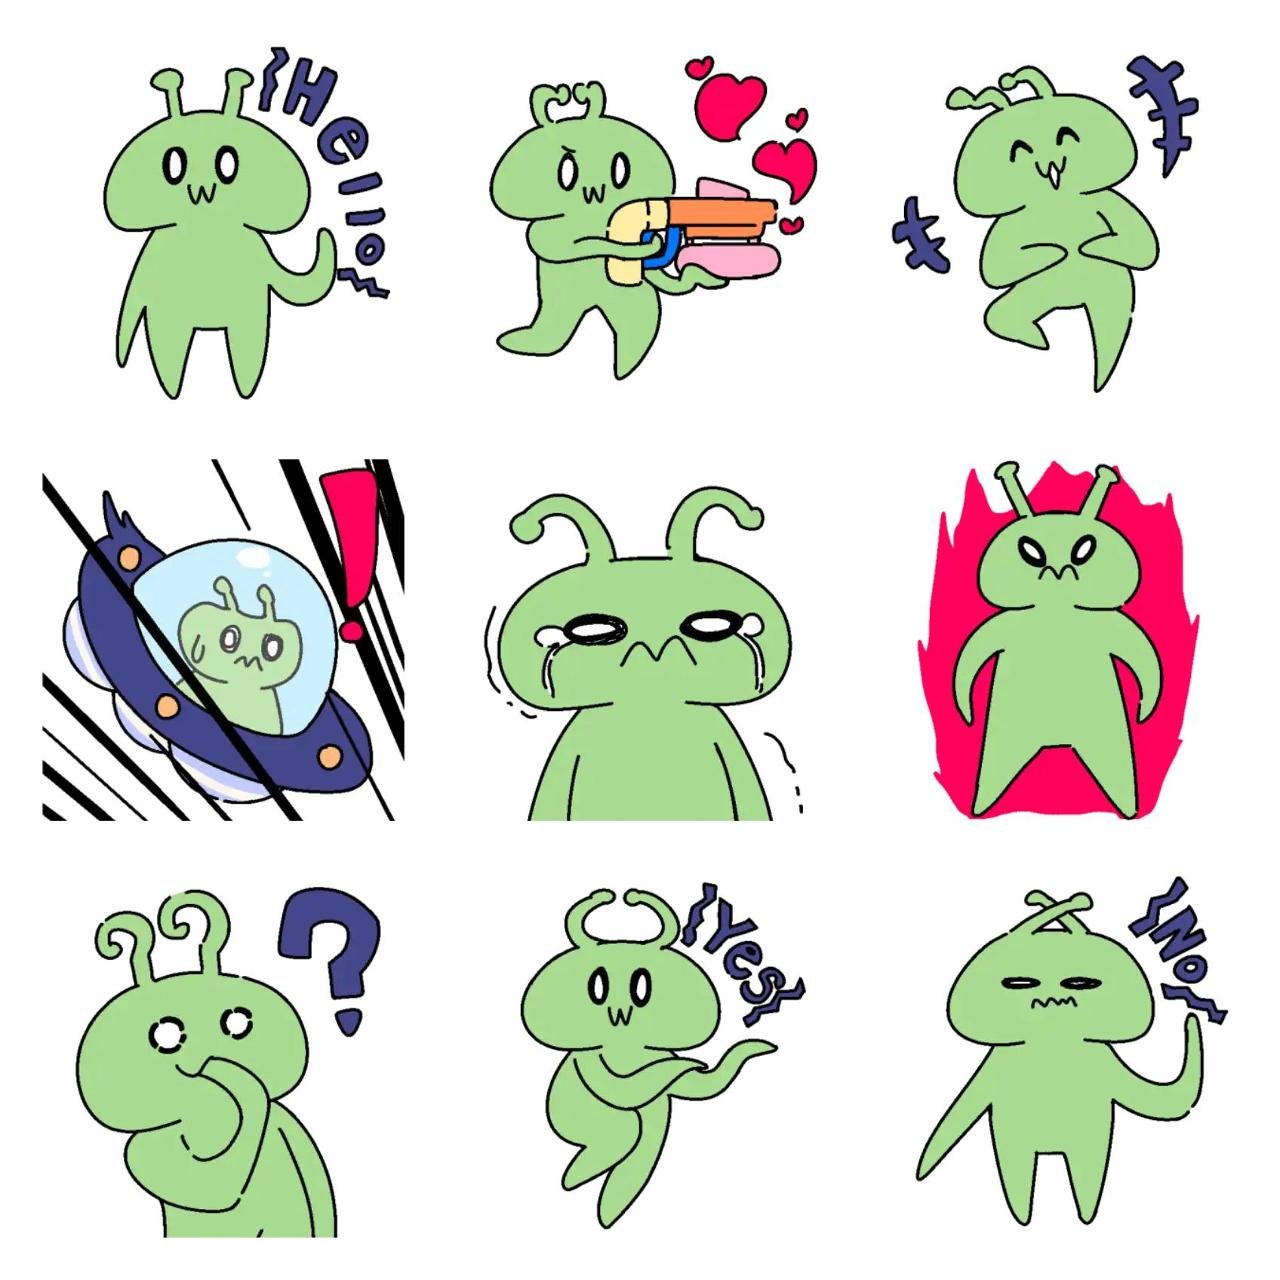 My friend green alien Animation/Cartoon,People sticker pack for Whatsapp, Telegram, Signal, and others chatting and message apps